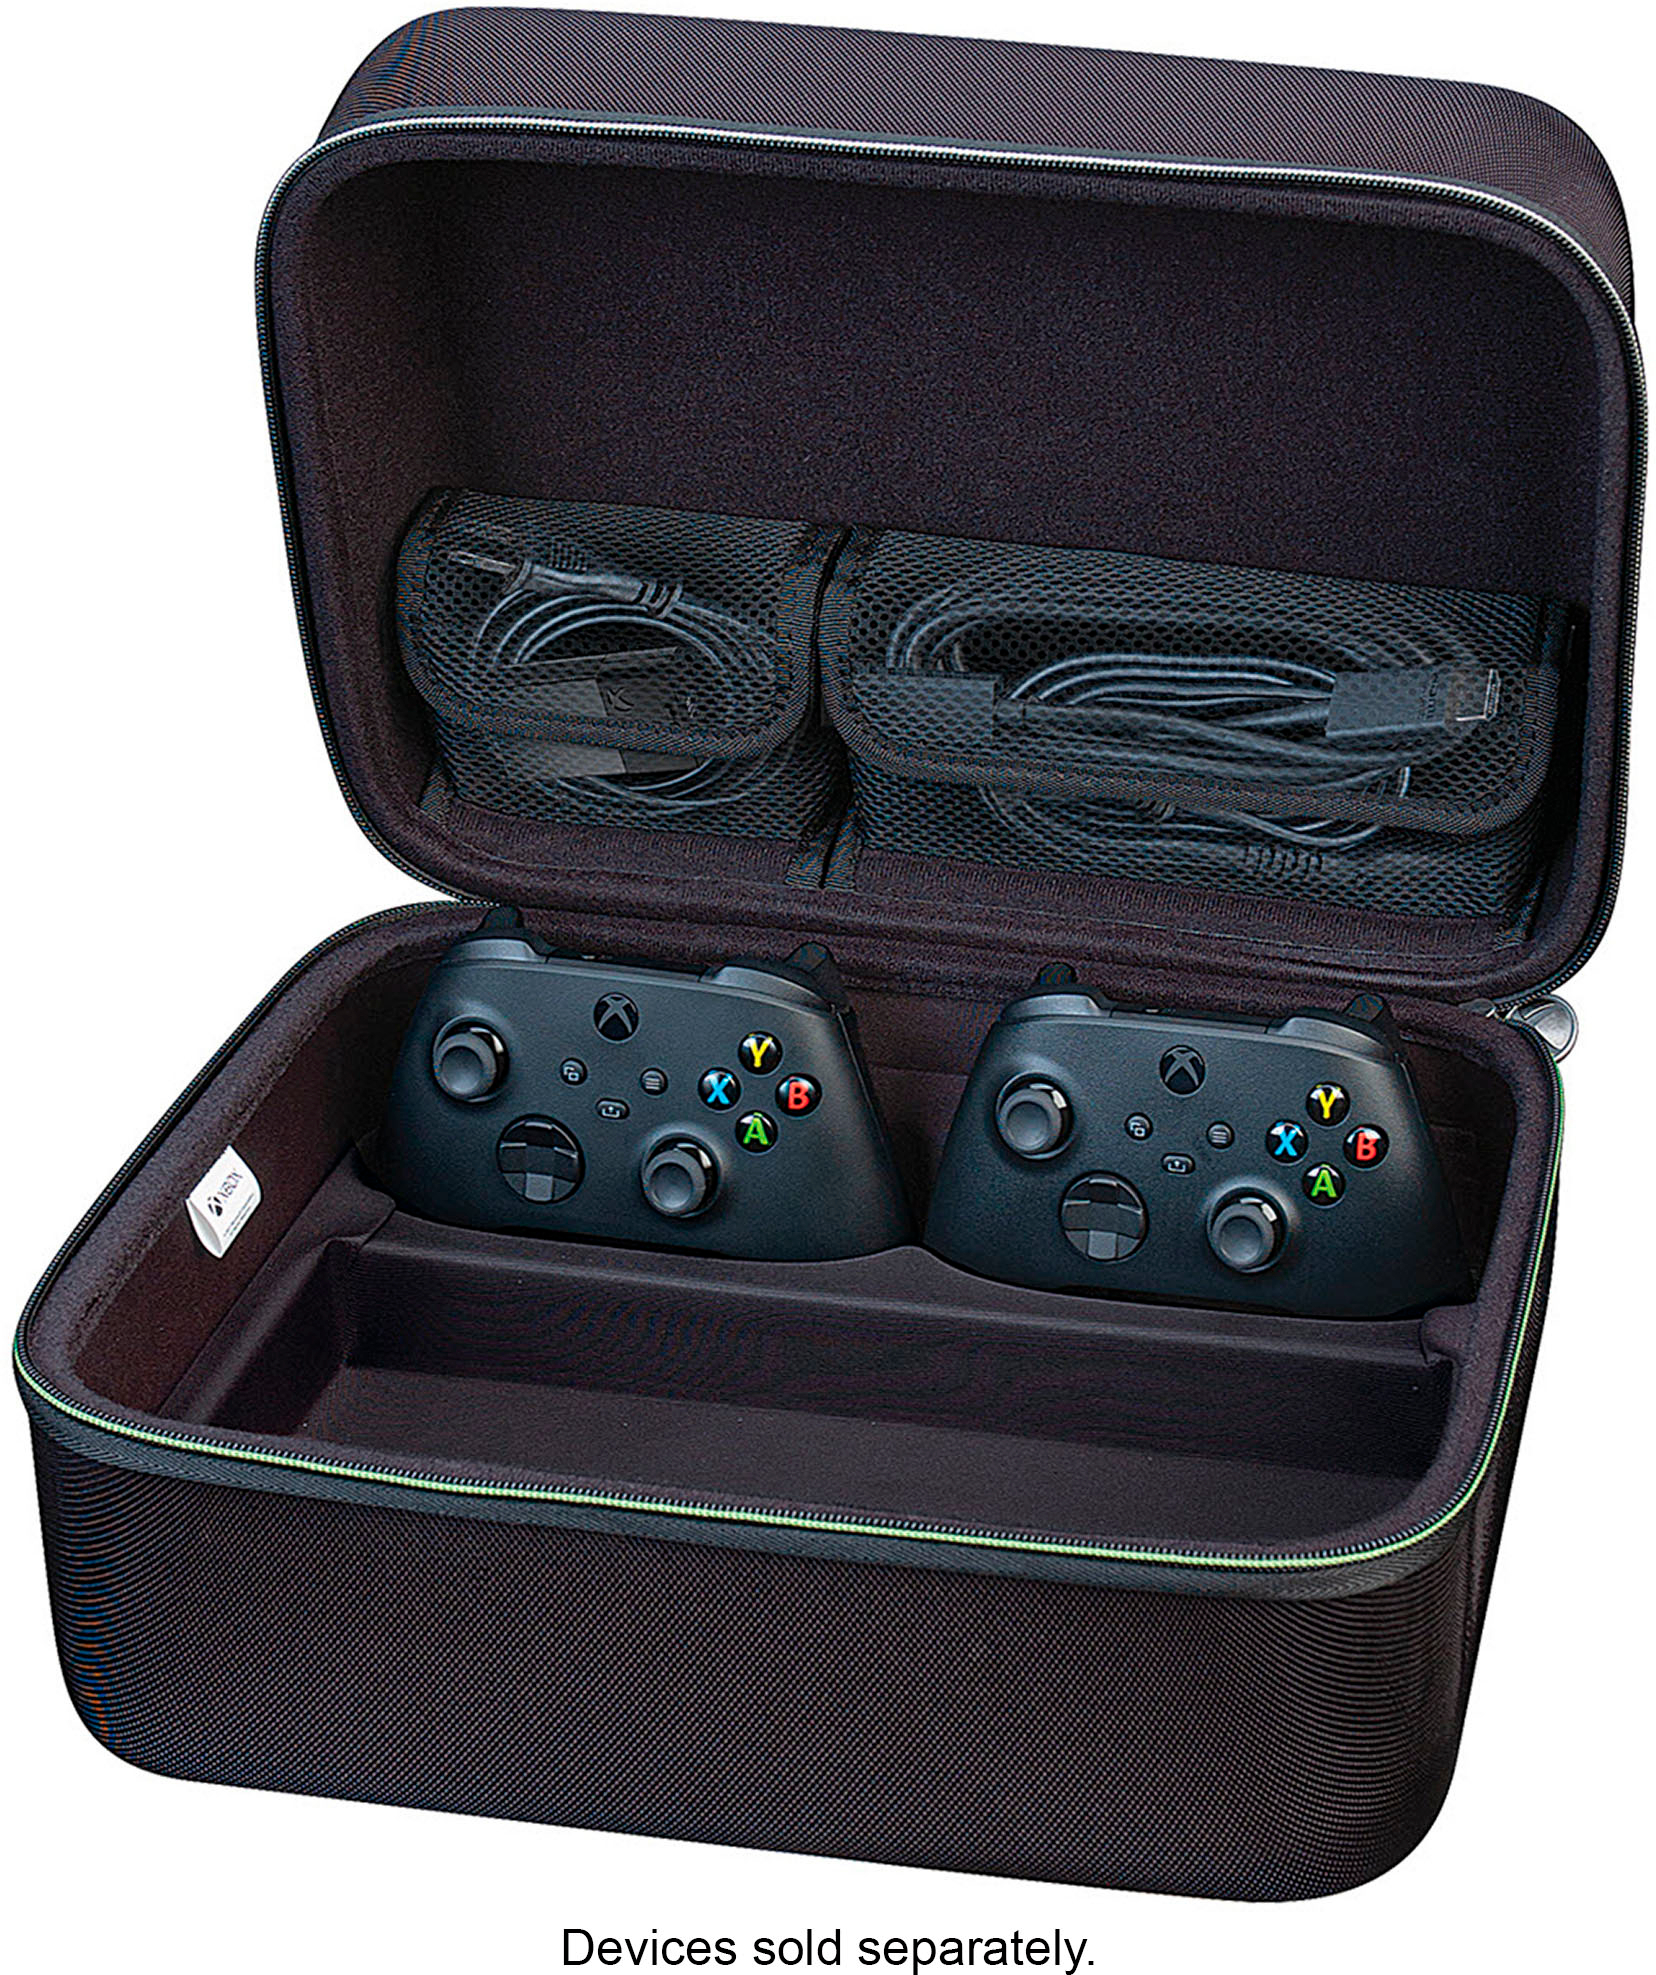 oamarando Carrying Case for XBOX,Compatible with XBOX SERIES X/S